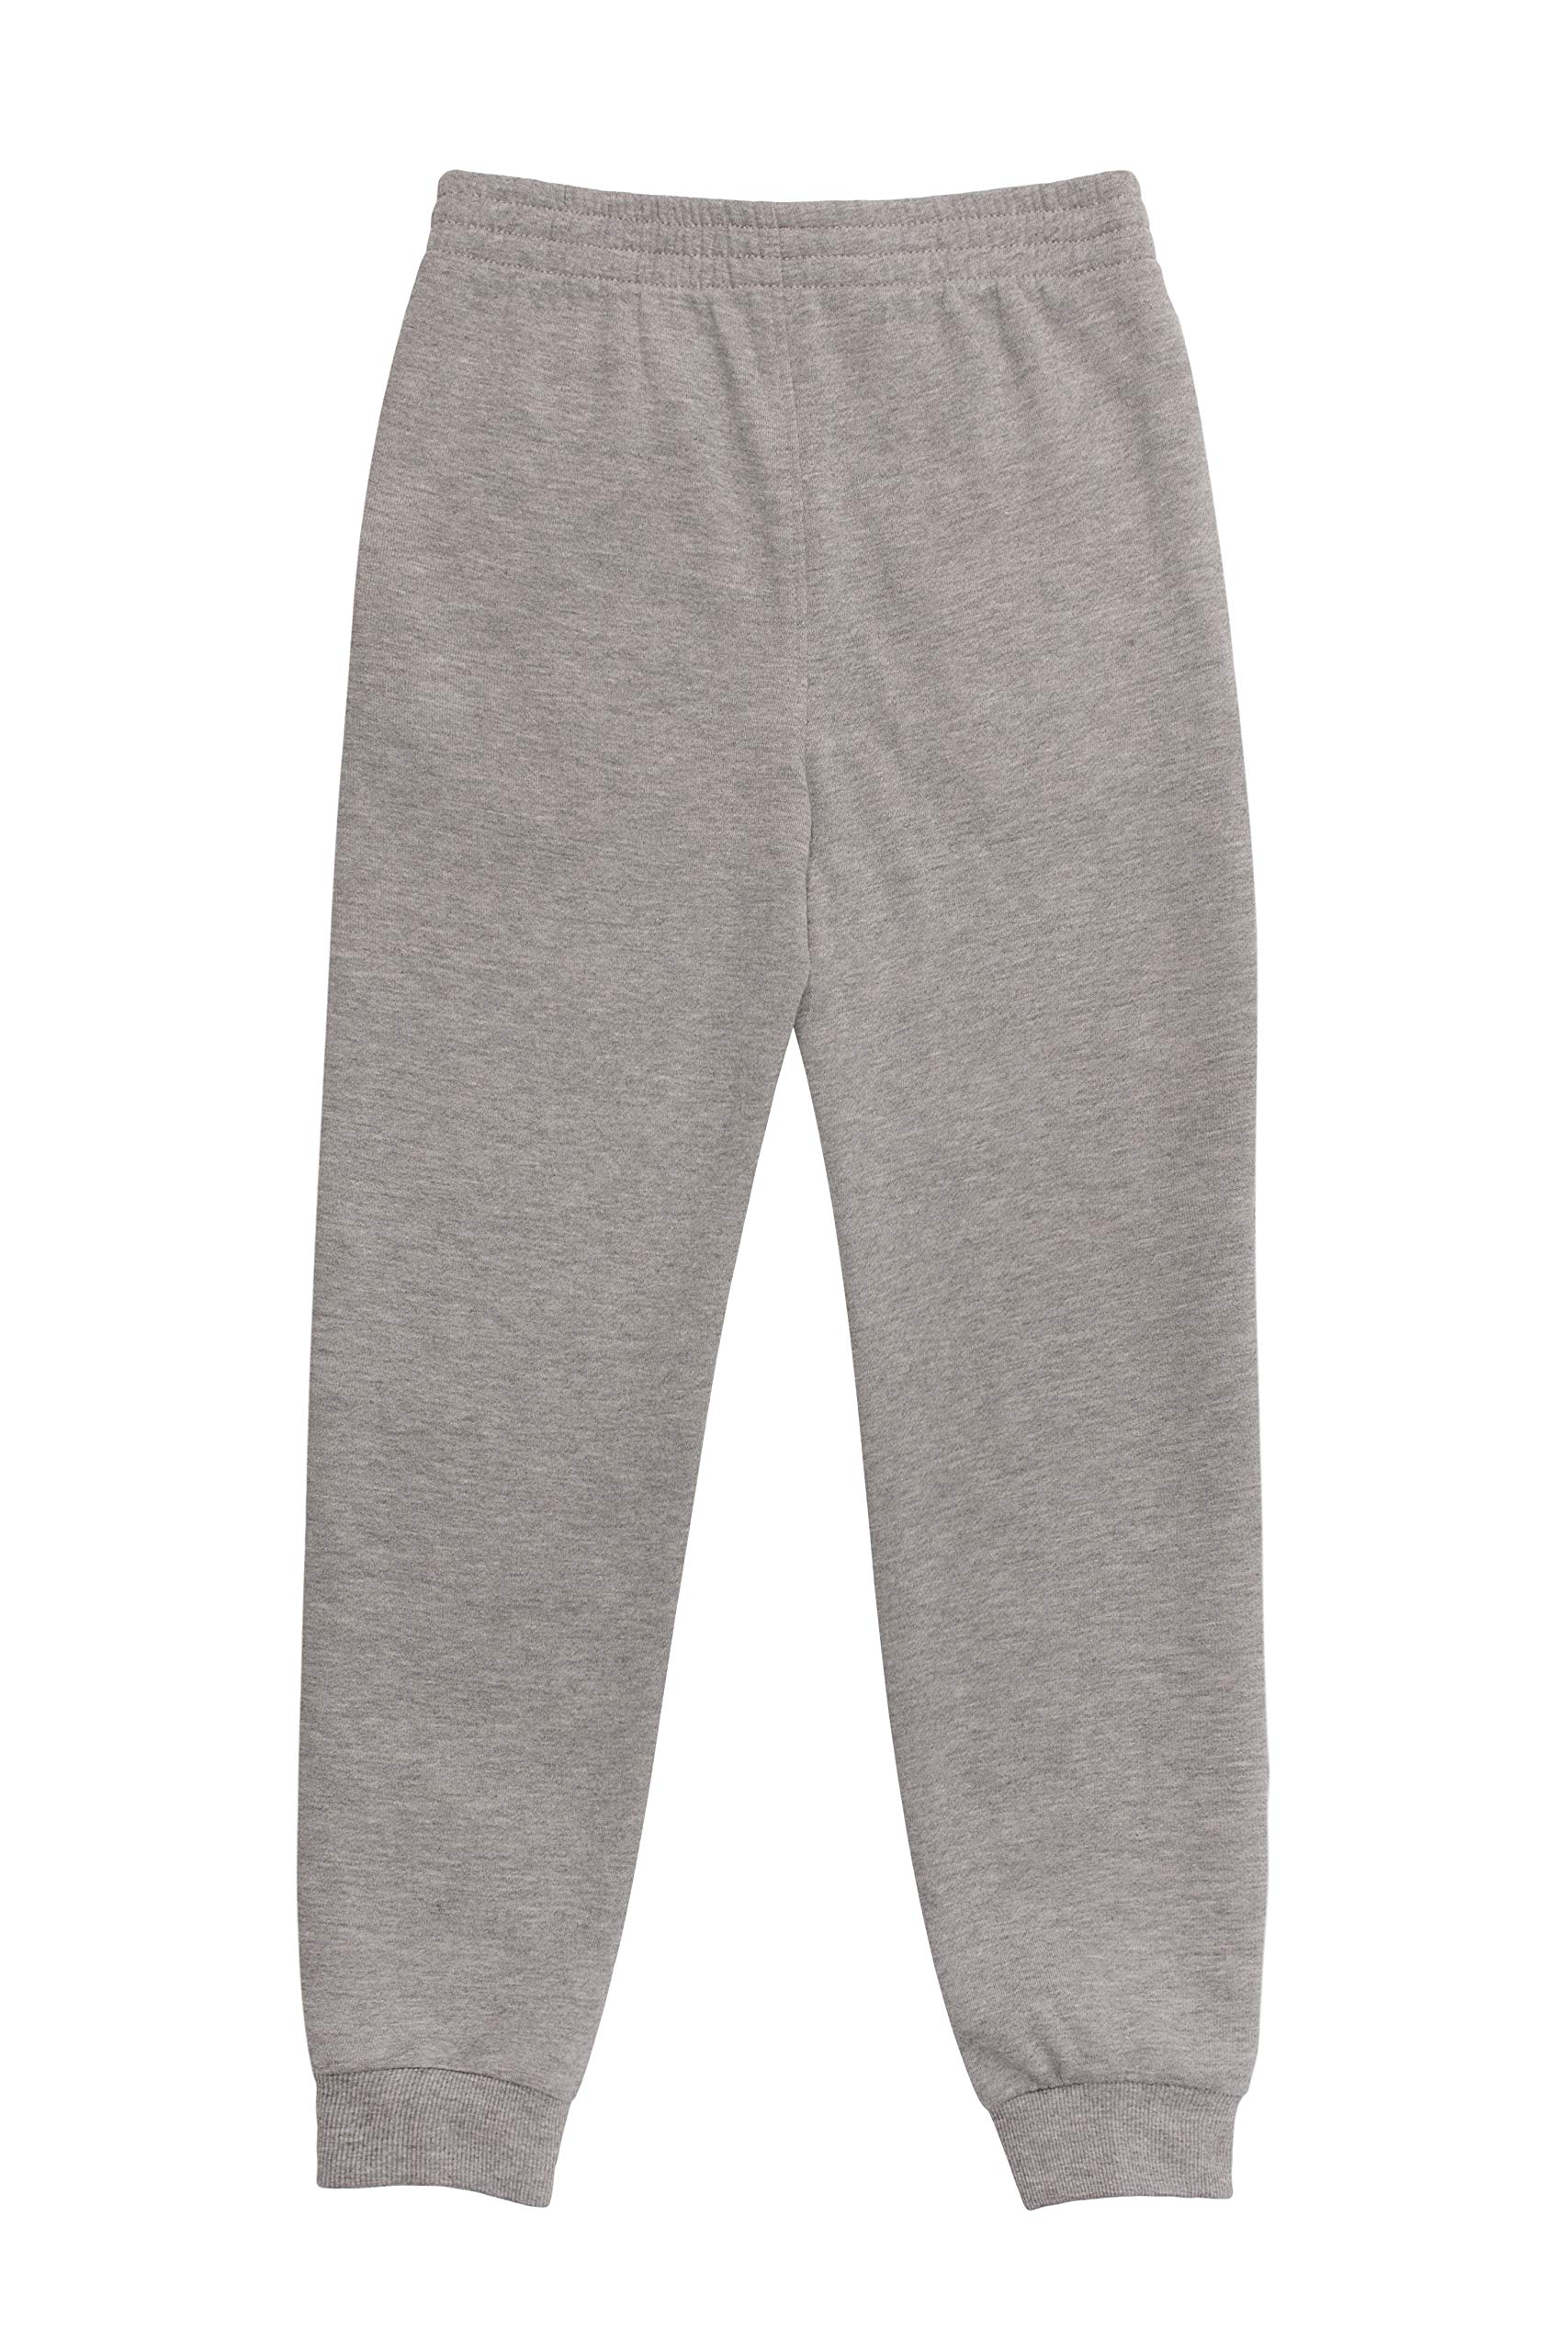 Champion Boys Sweatpant Heritage Collection Slim Fit Brushed Fleece Big and Little Boys Kids